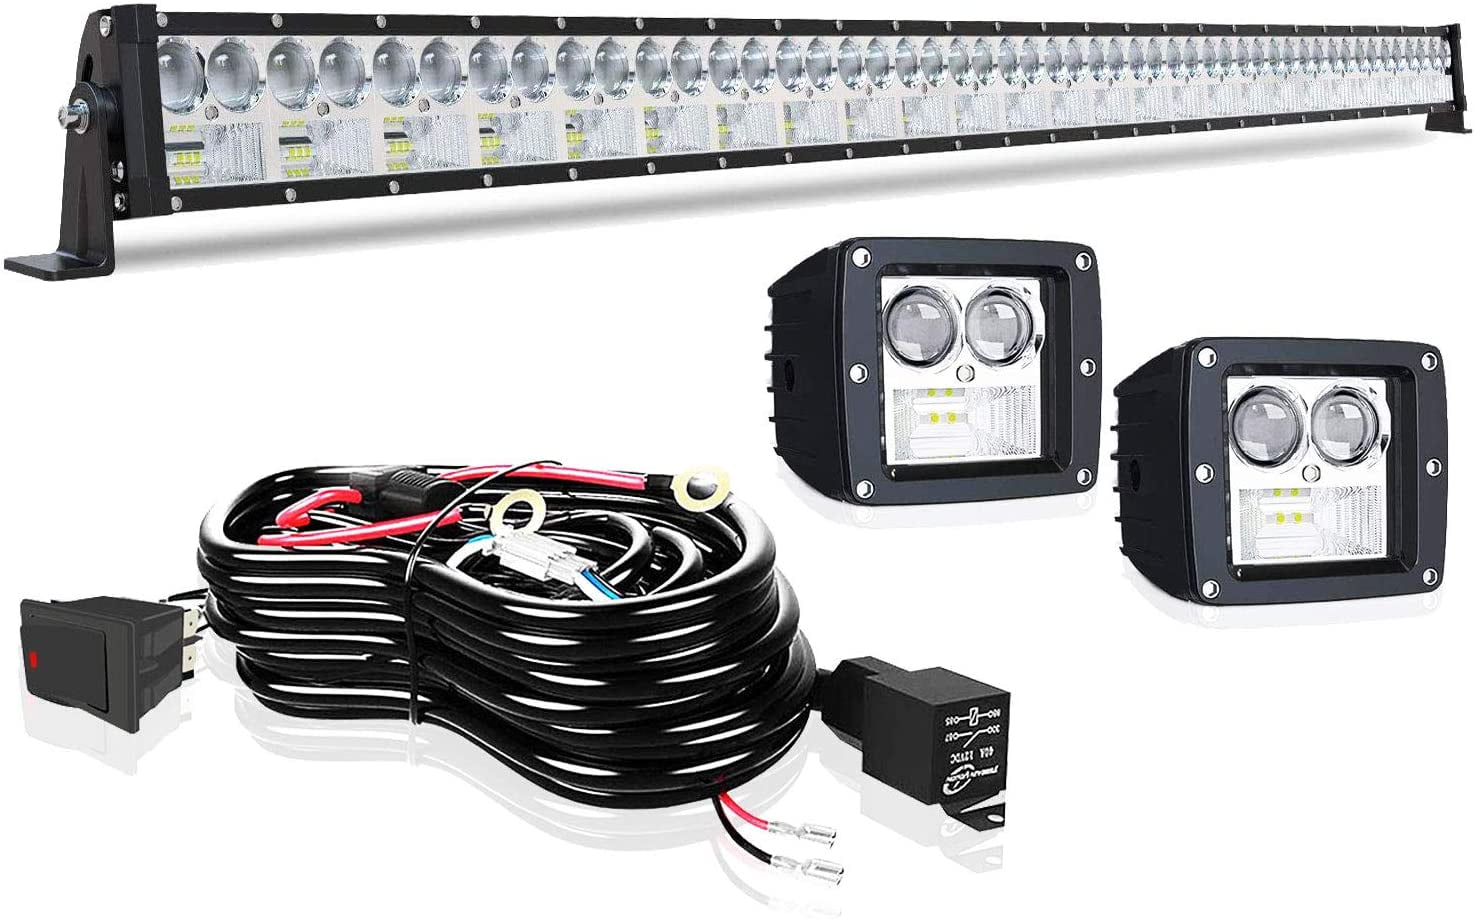 Details about   52'' 300W LED Light Bar+4'' 18W Pods Fits Ford Truck RZR Boat Ford ATV+2X Wiring